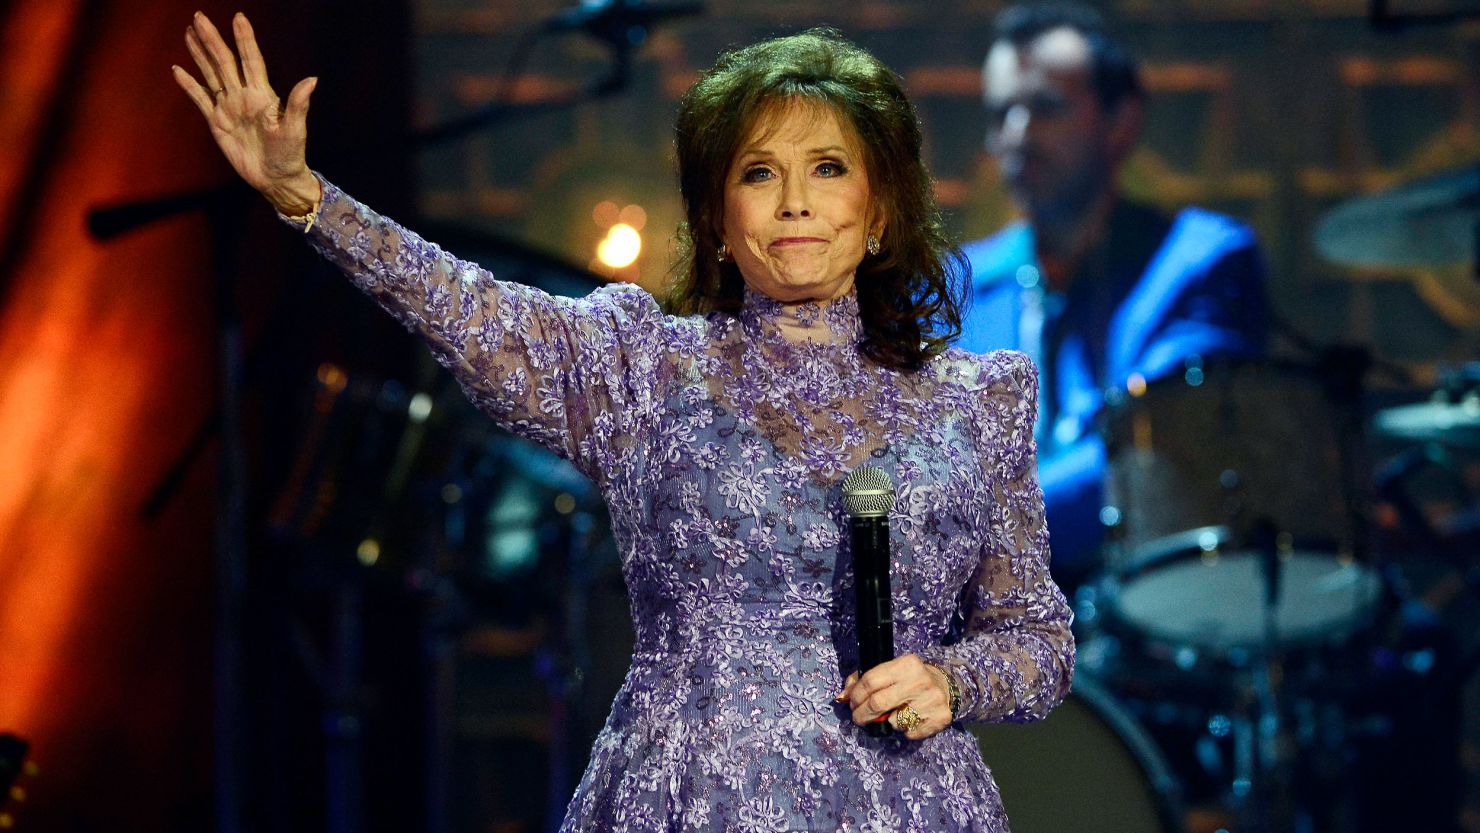 Loretta Lynn waves to the crowd after performing during the Americana Music Honors and Awards show on Wednesday, Sept. 17, 2014, in Nashville, Tennessee. Lynn died on Tuesday at the age of 90.